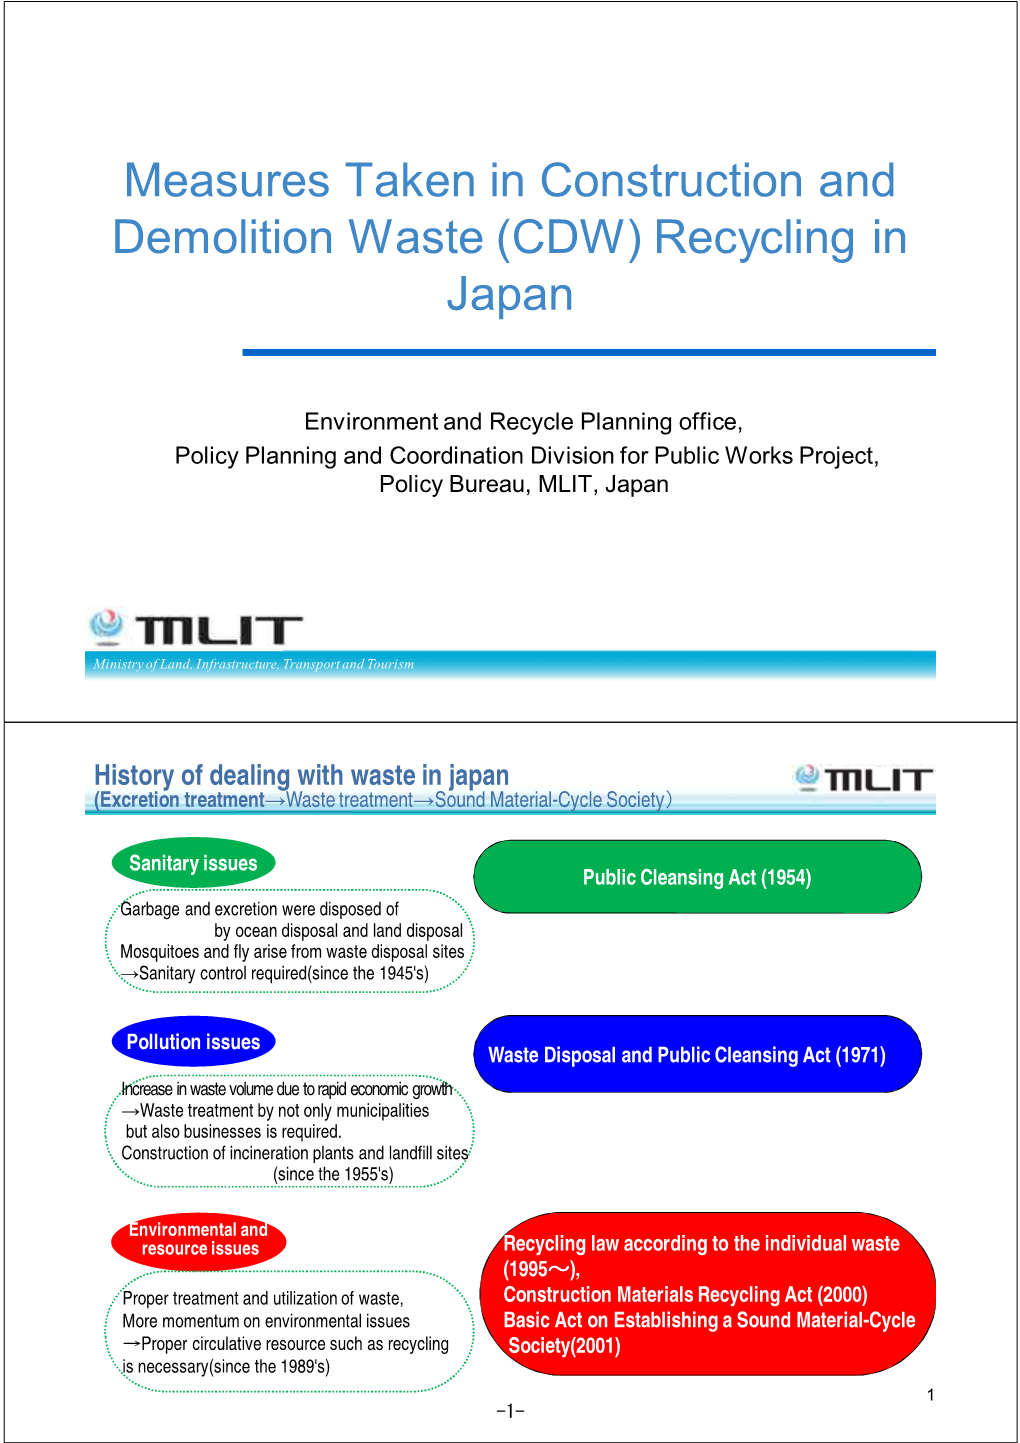 Measures Taken in Construction and Demolition Waste (CDW) Recycling in Japan